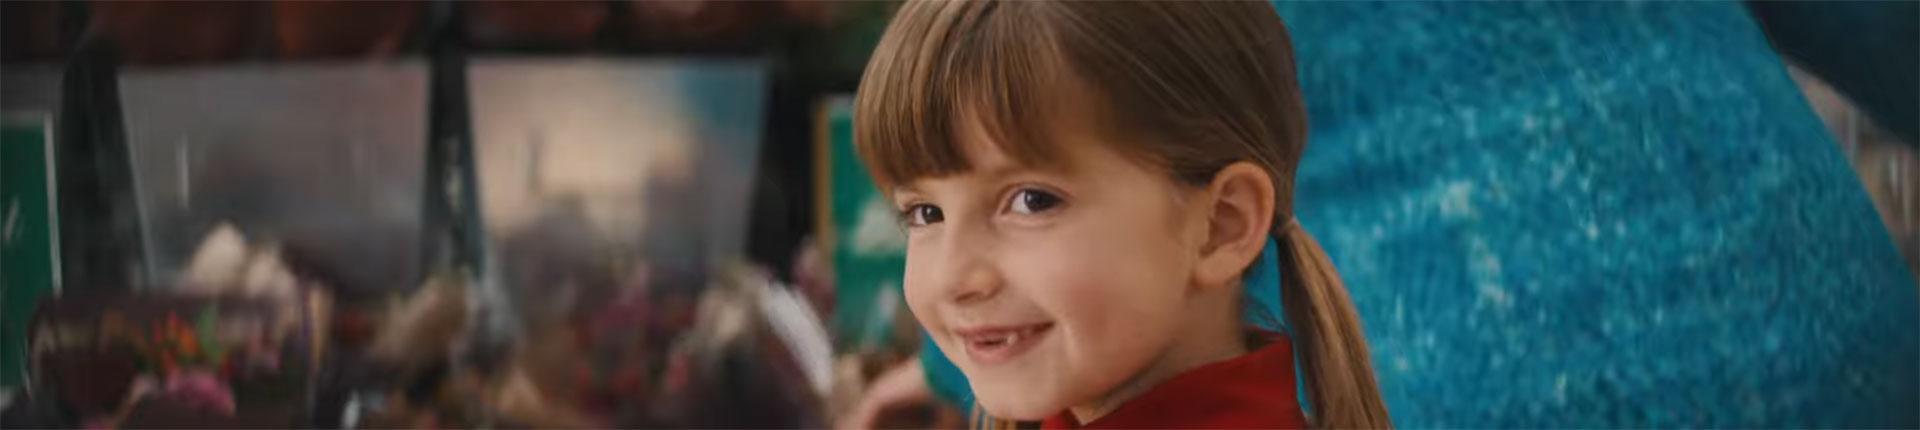 Sainsbury: This Christmas, one little girl asks one BIG question